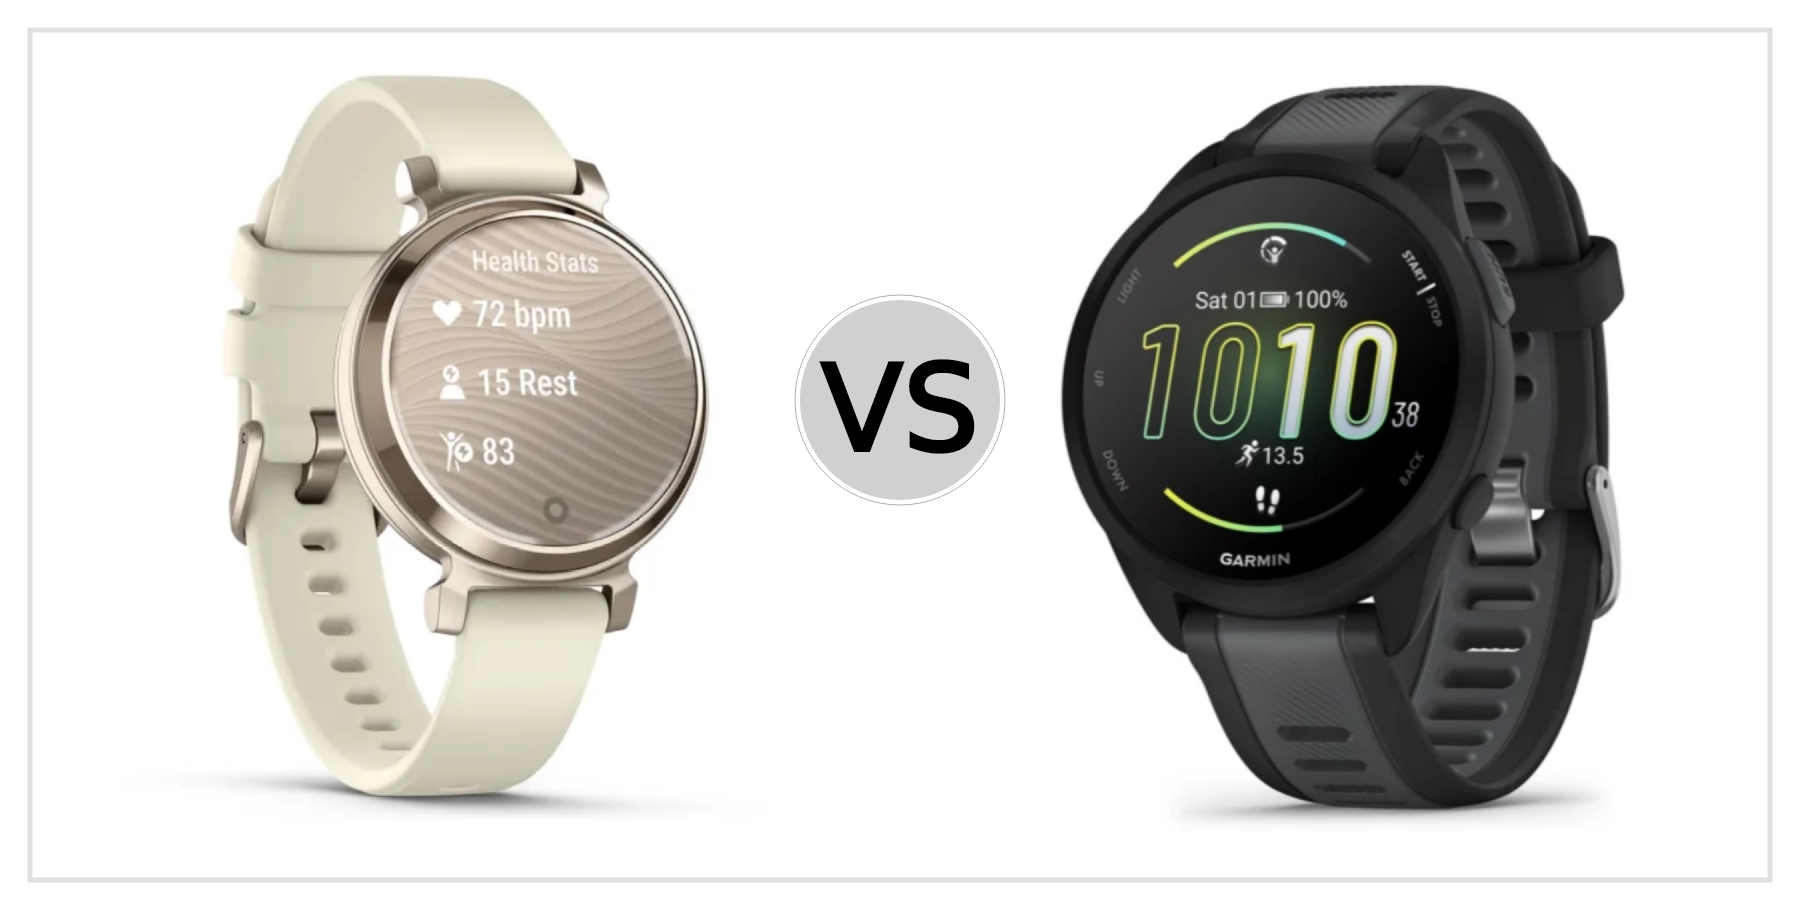 Compare Garmin Lily 2 VS Garmin Forerunner 165 to see which is better